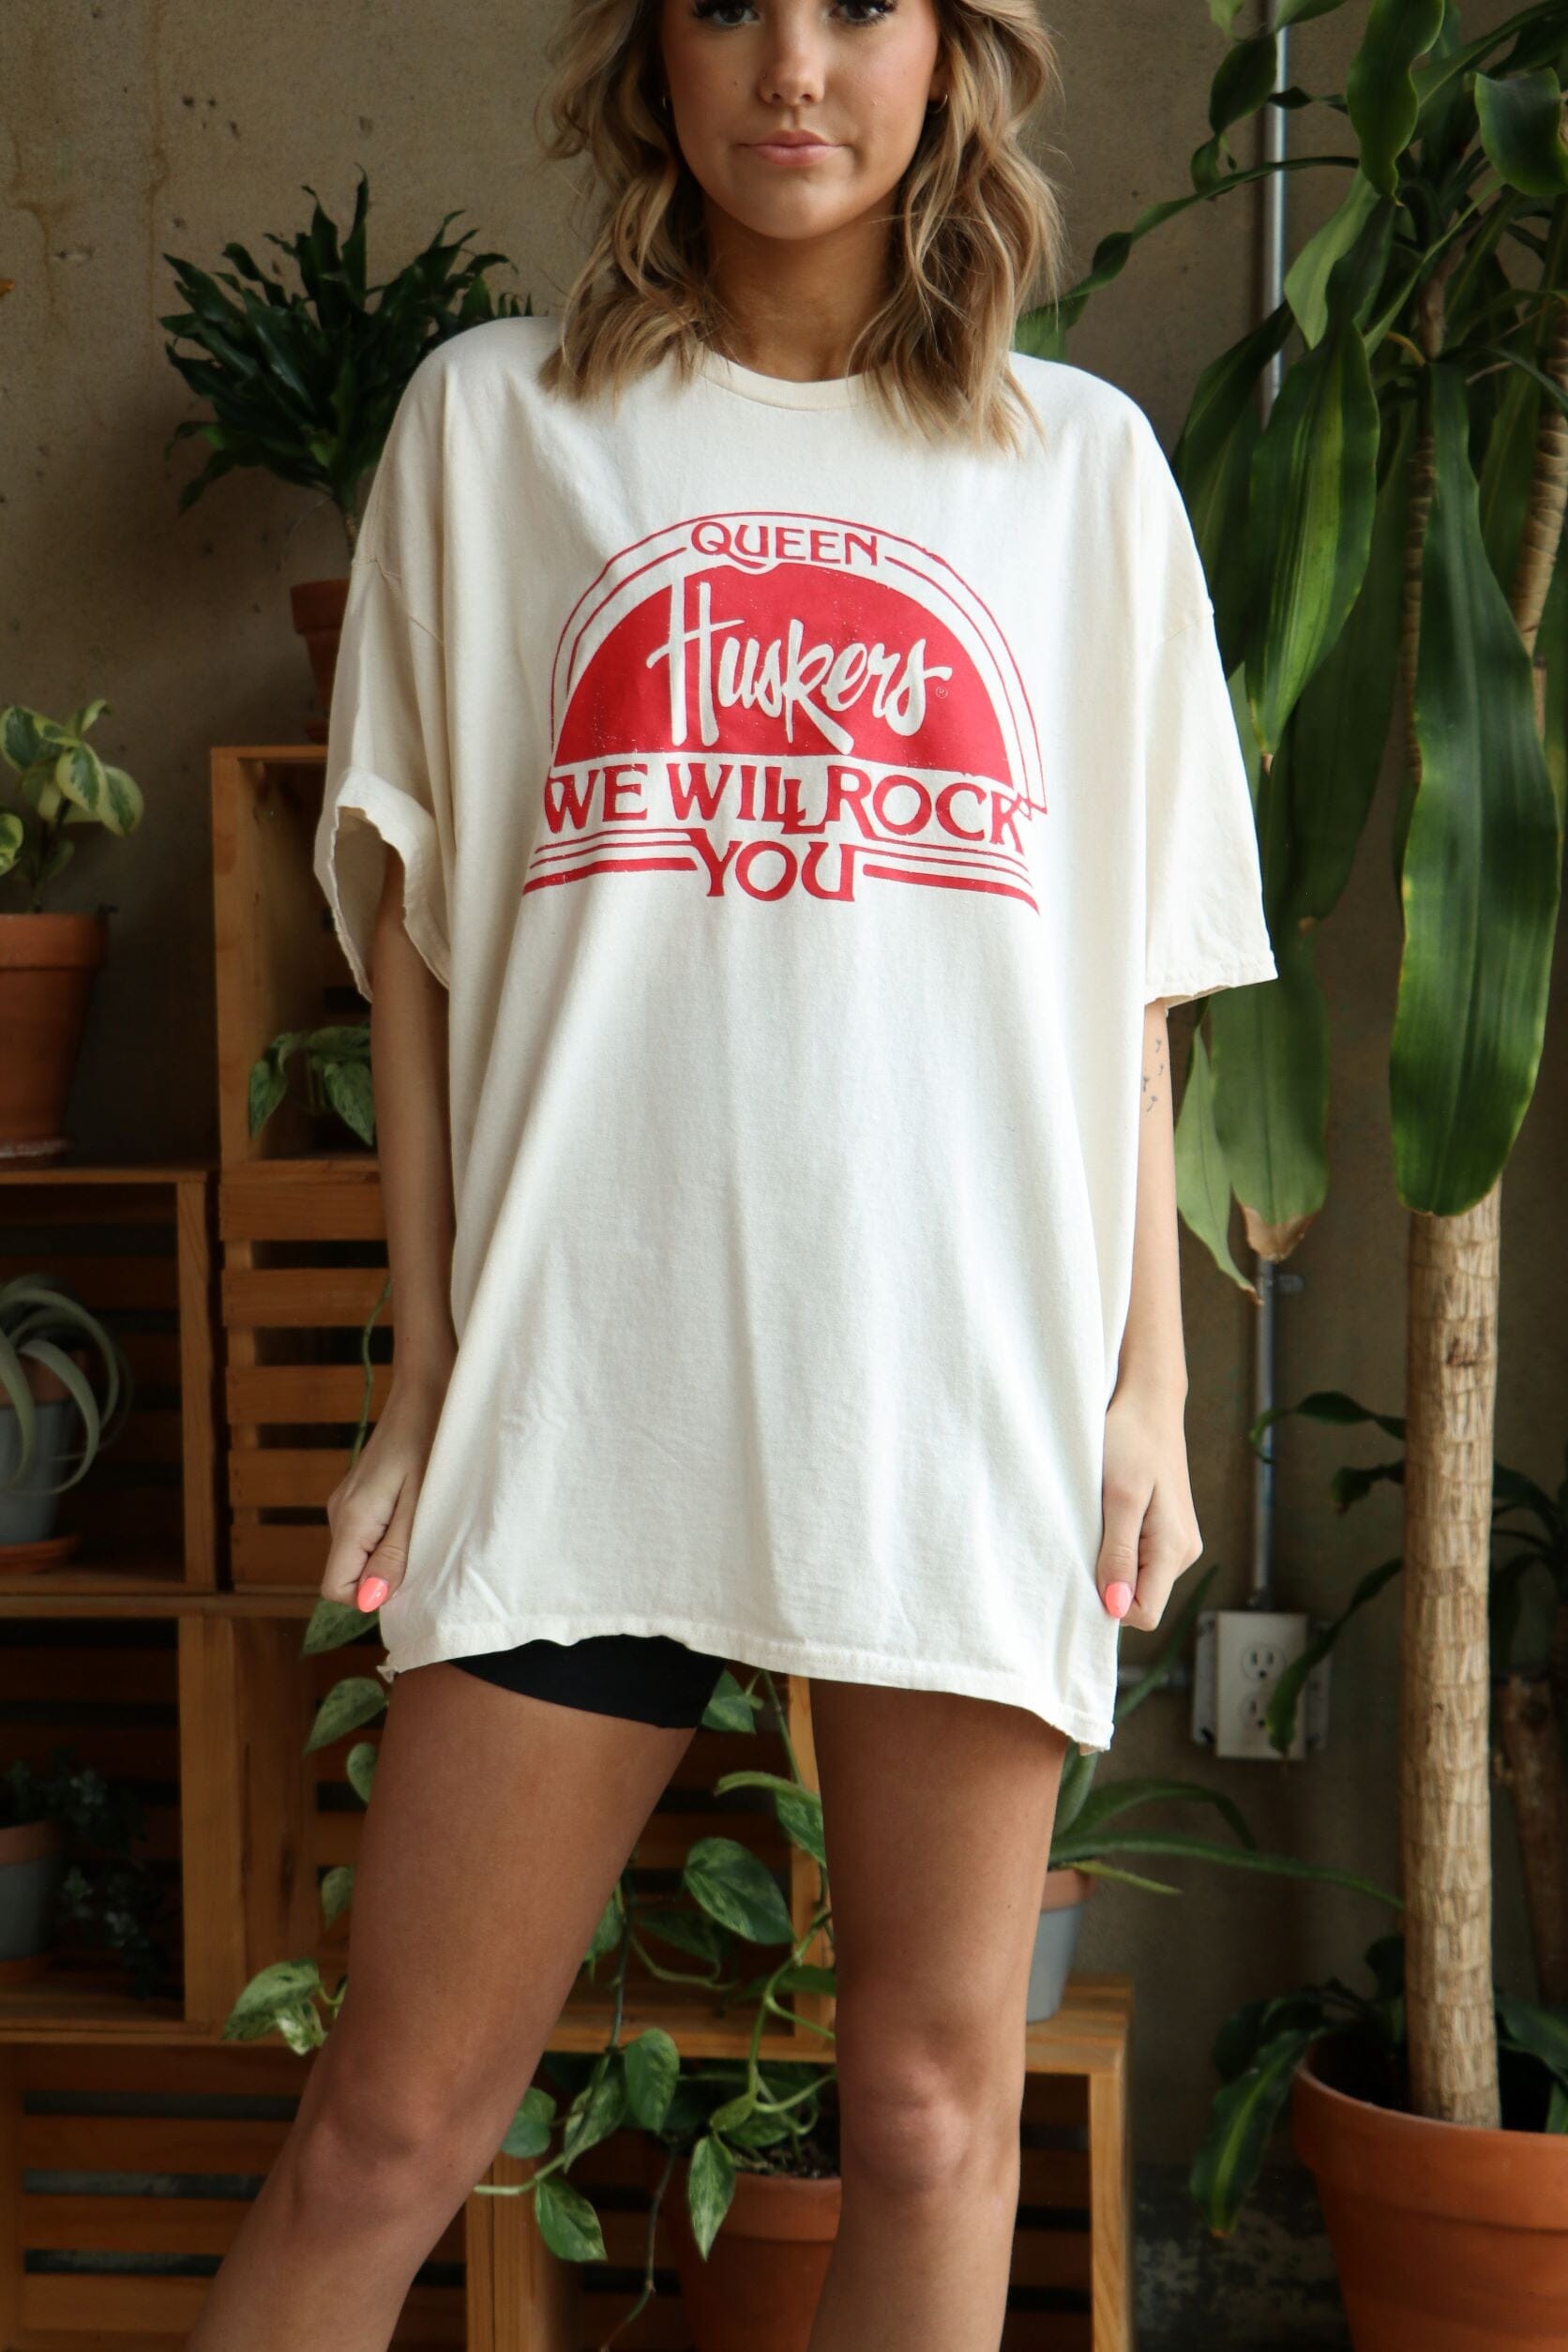 Queen Huskers Will Rock You Off White Thrifted Tee